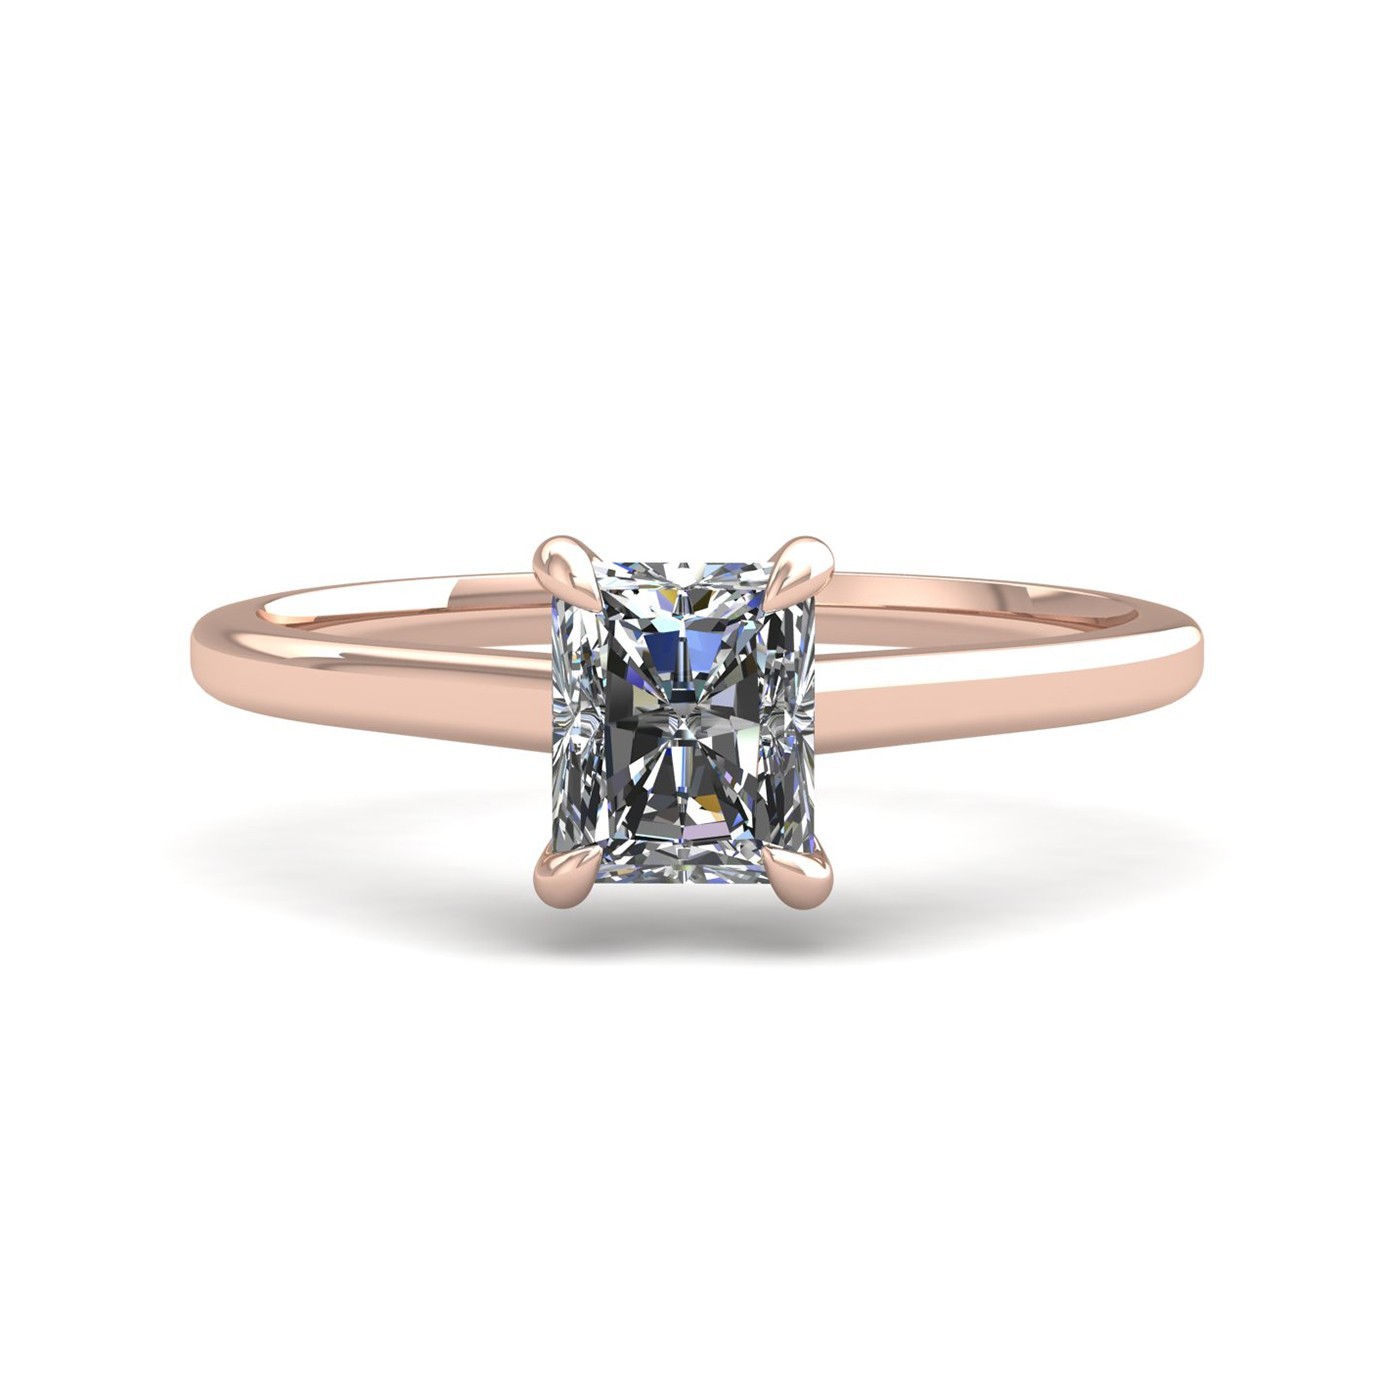 18k rose gold  0,80 ct 4 prongs solitaire radiant cut diamond engagement ring with whisper thin band